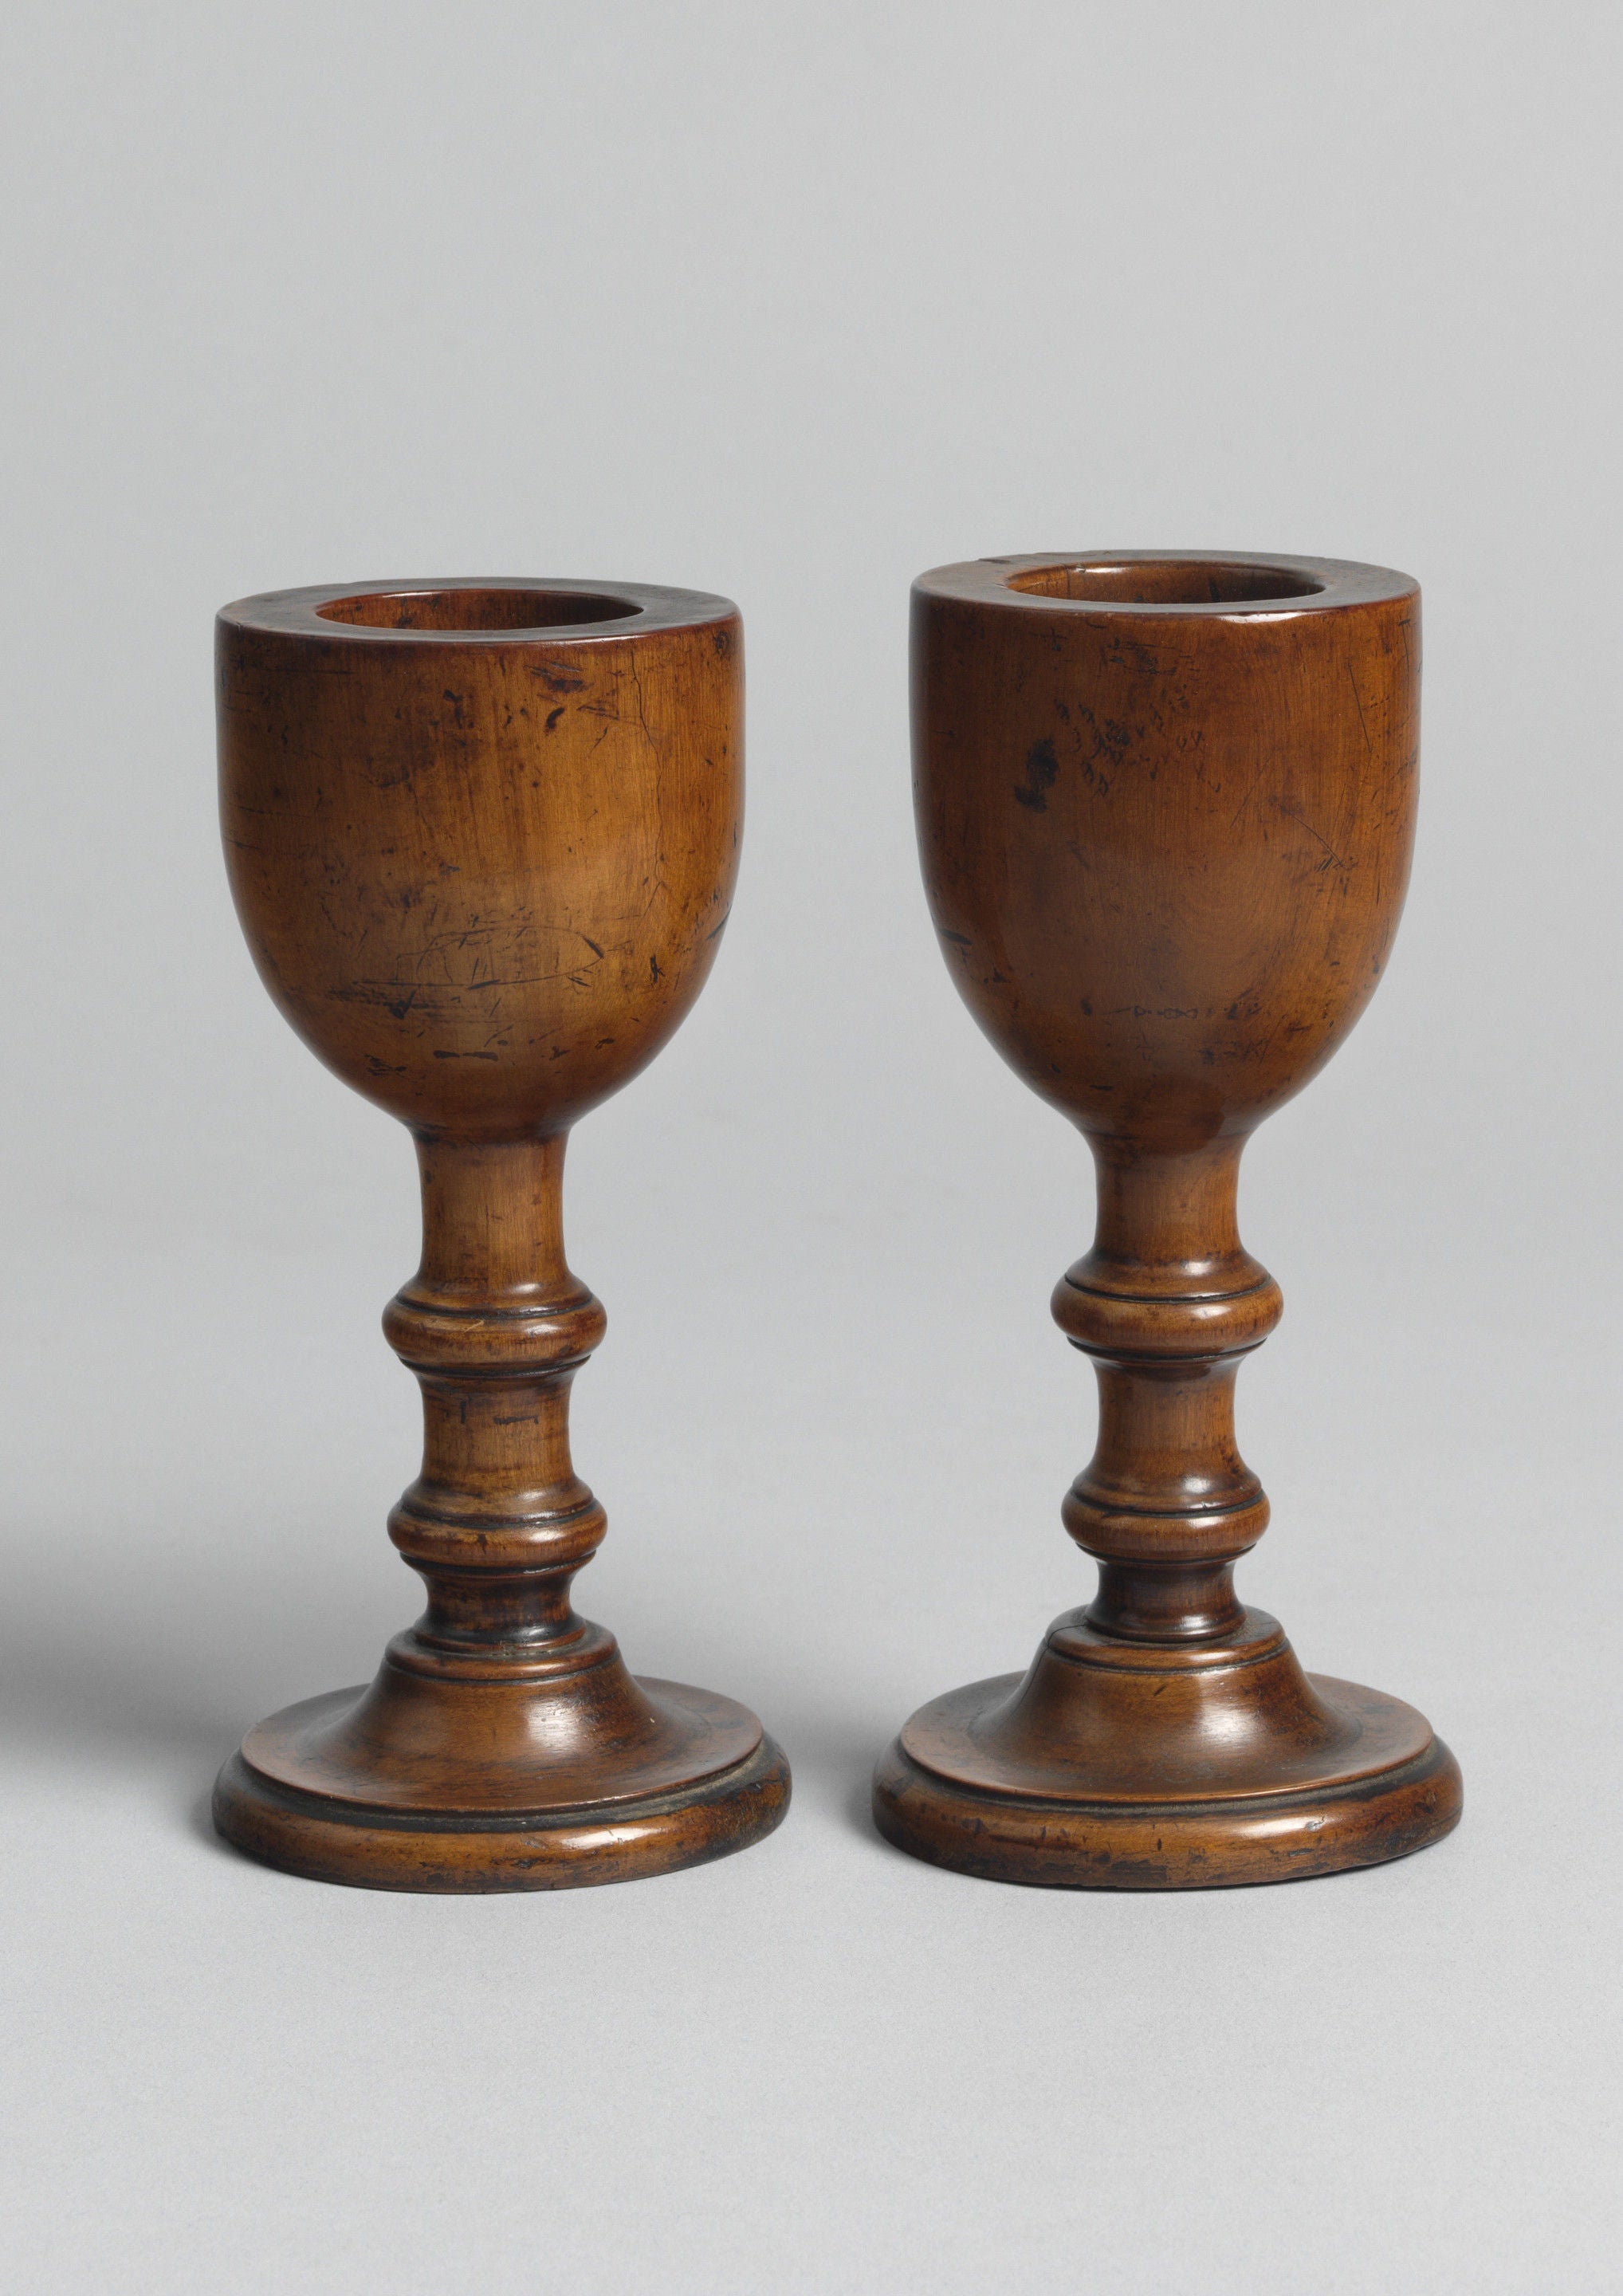 Fine Pair of Early Turned Vessels